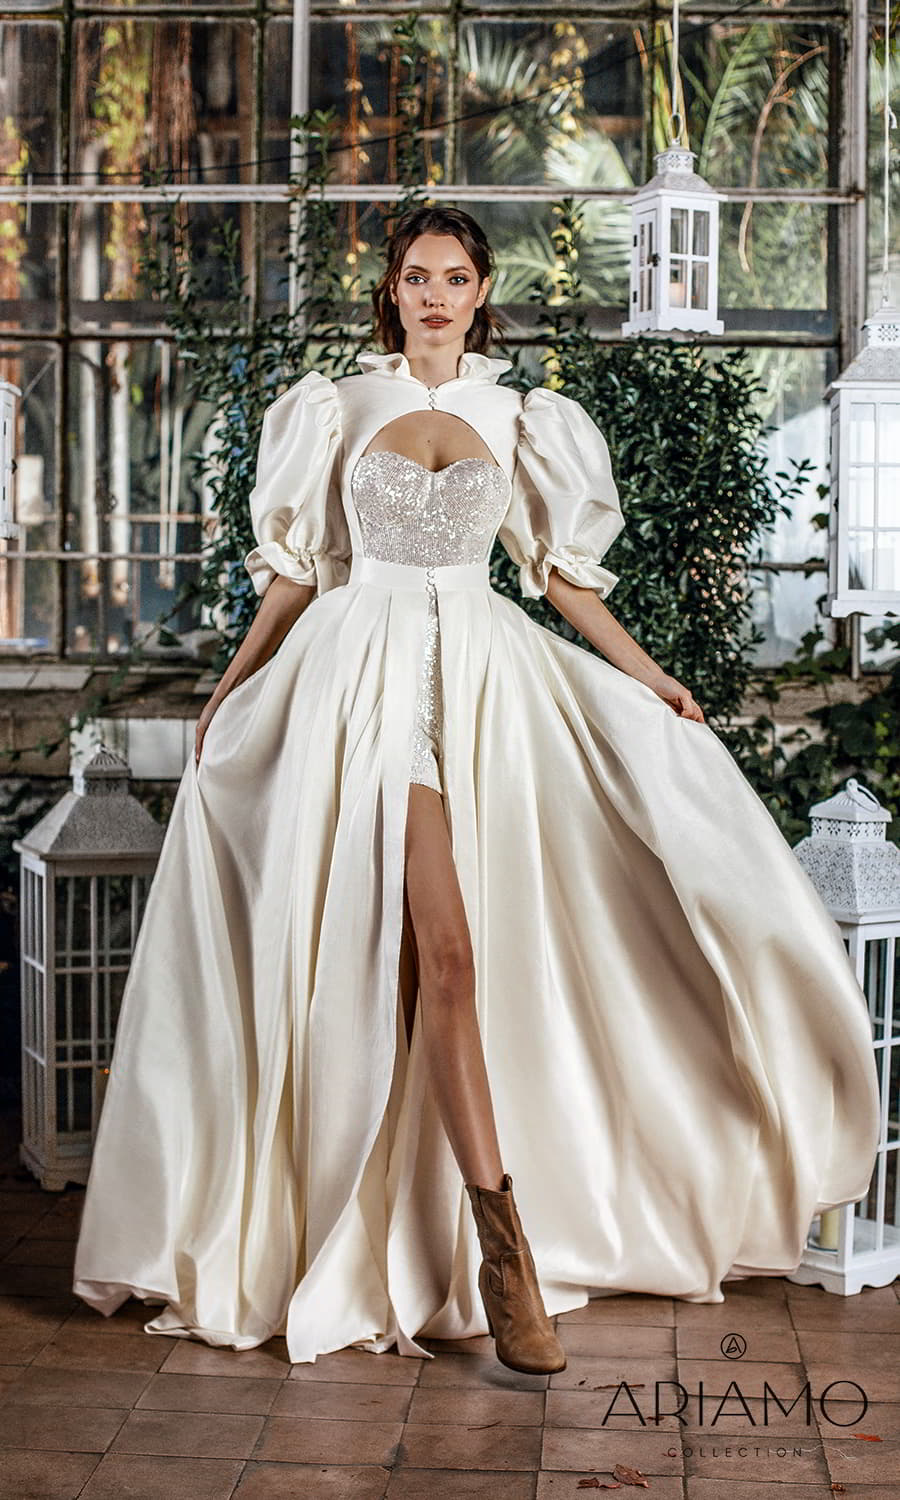 ariamo 2022 bridal strapless sweetheart embellished playsuit elbow length puff sleeve over dress 2 piece ball gown wedding dress chapel train (sienna) mv